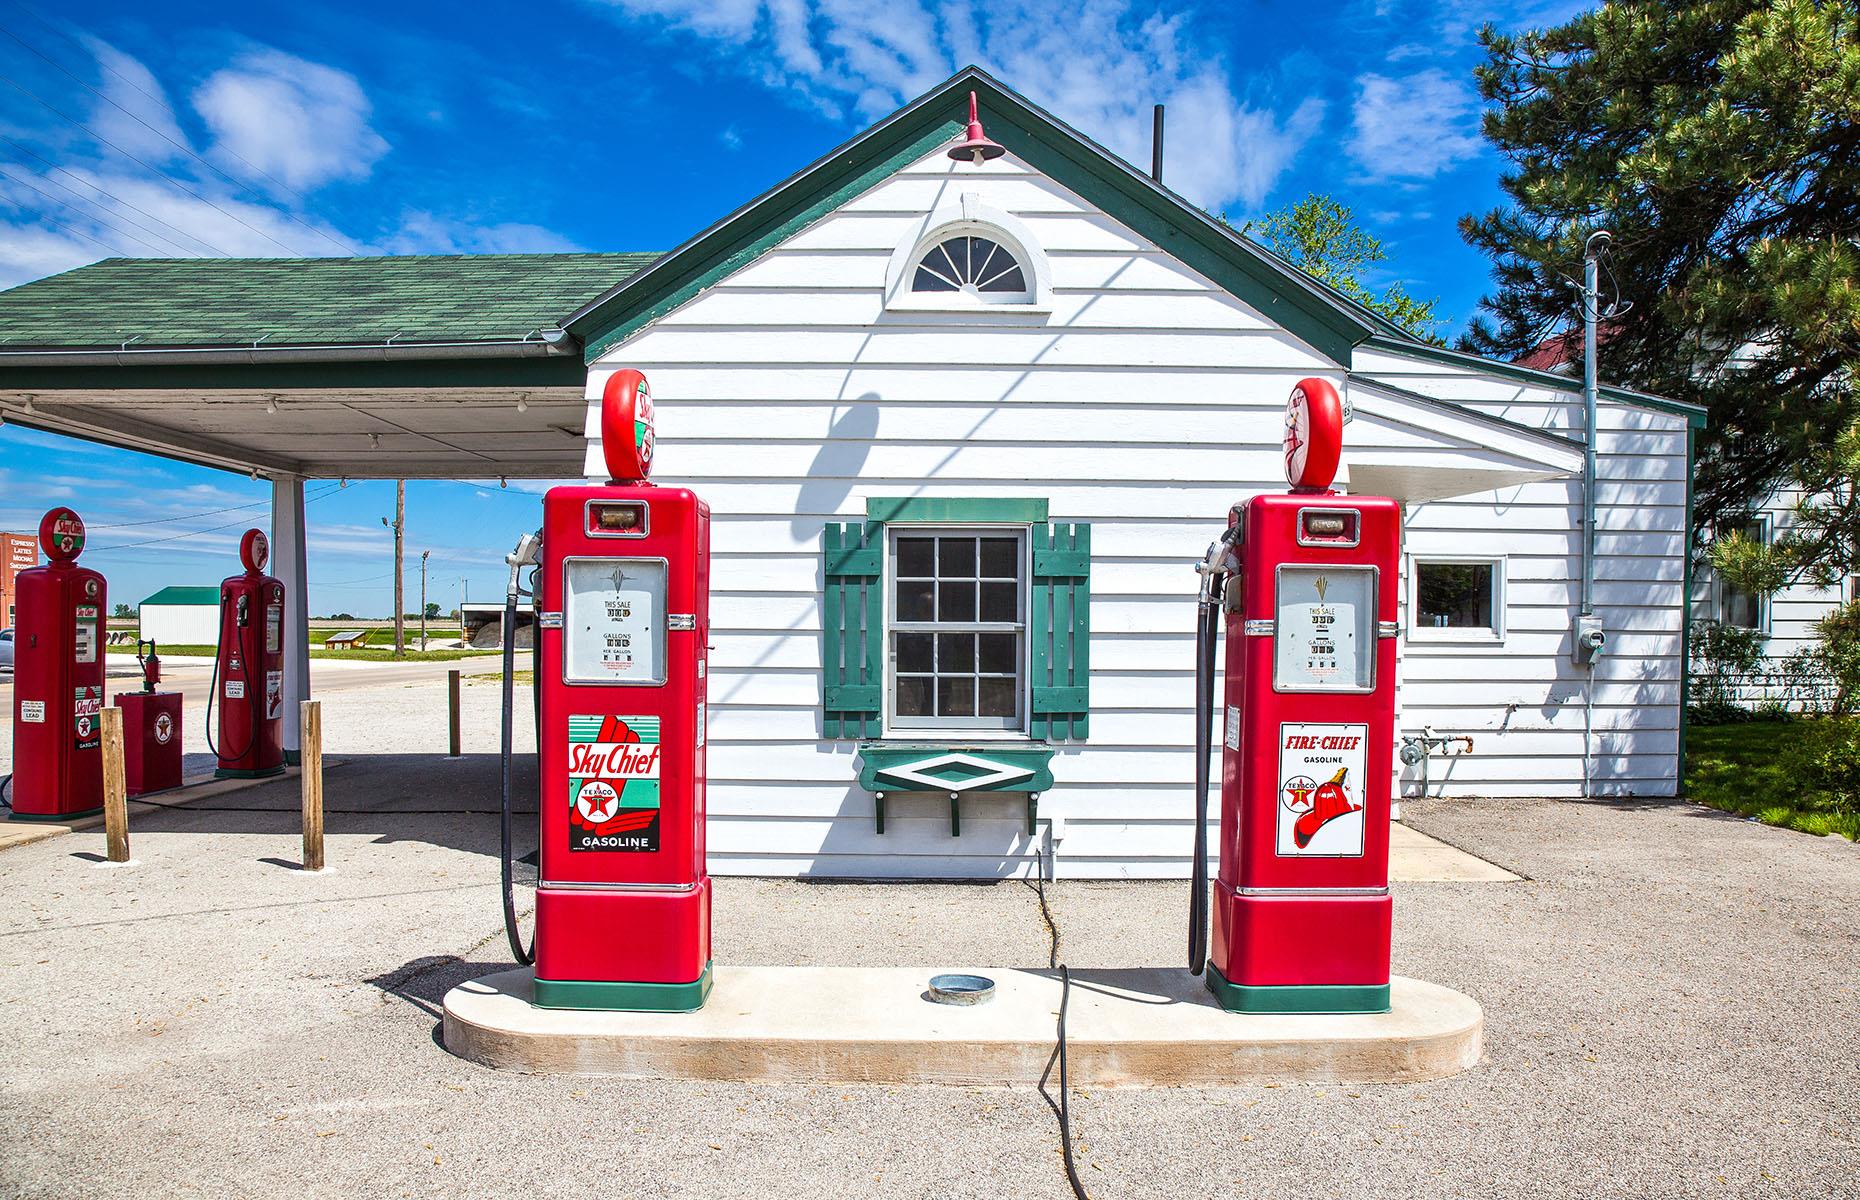 <p>For a classic slice of Route 66 history, stop for a photo at the Ambler’s Texaco gas station in Dwight, Illinois. Once the longest-running gas station on the highway, it was donated to the village of Dwight and lovingly restored. There’s no gas though, so fill up elsewhere!</p>